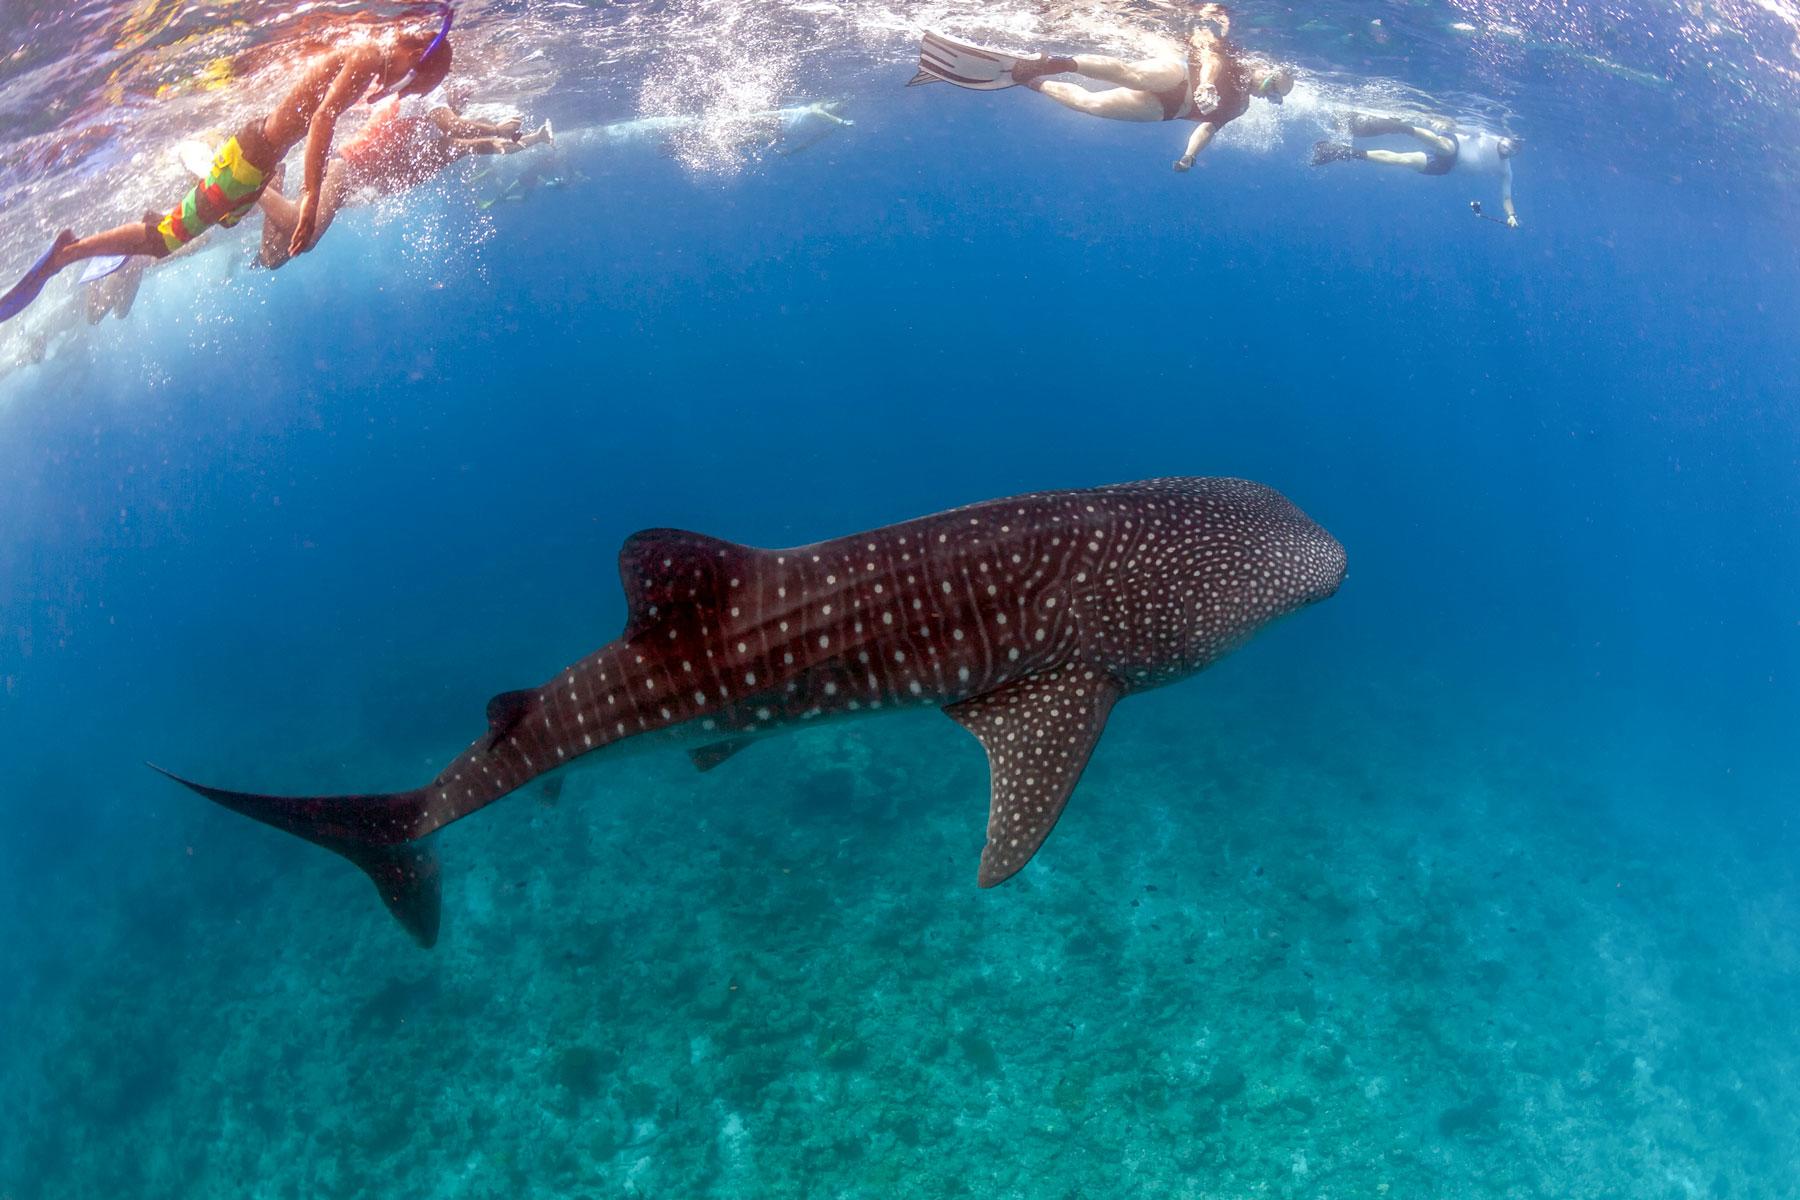 Where Can You Swim Or Snorkel With Whale Sharks